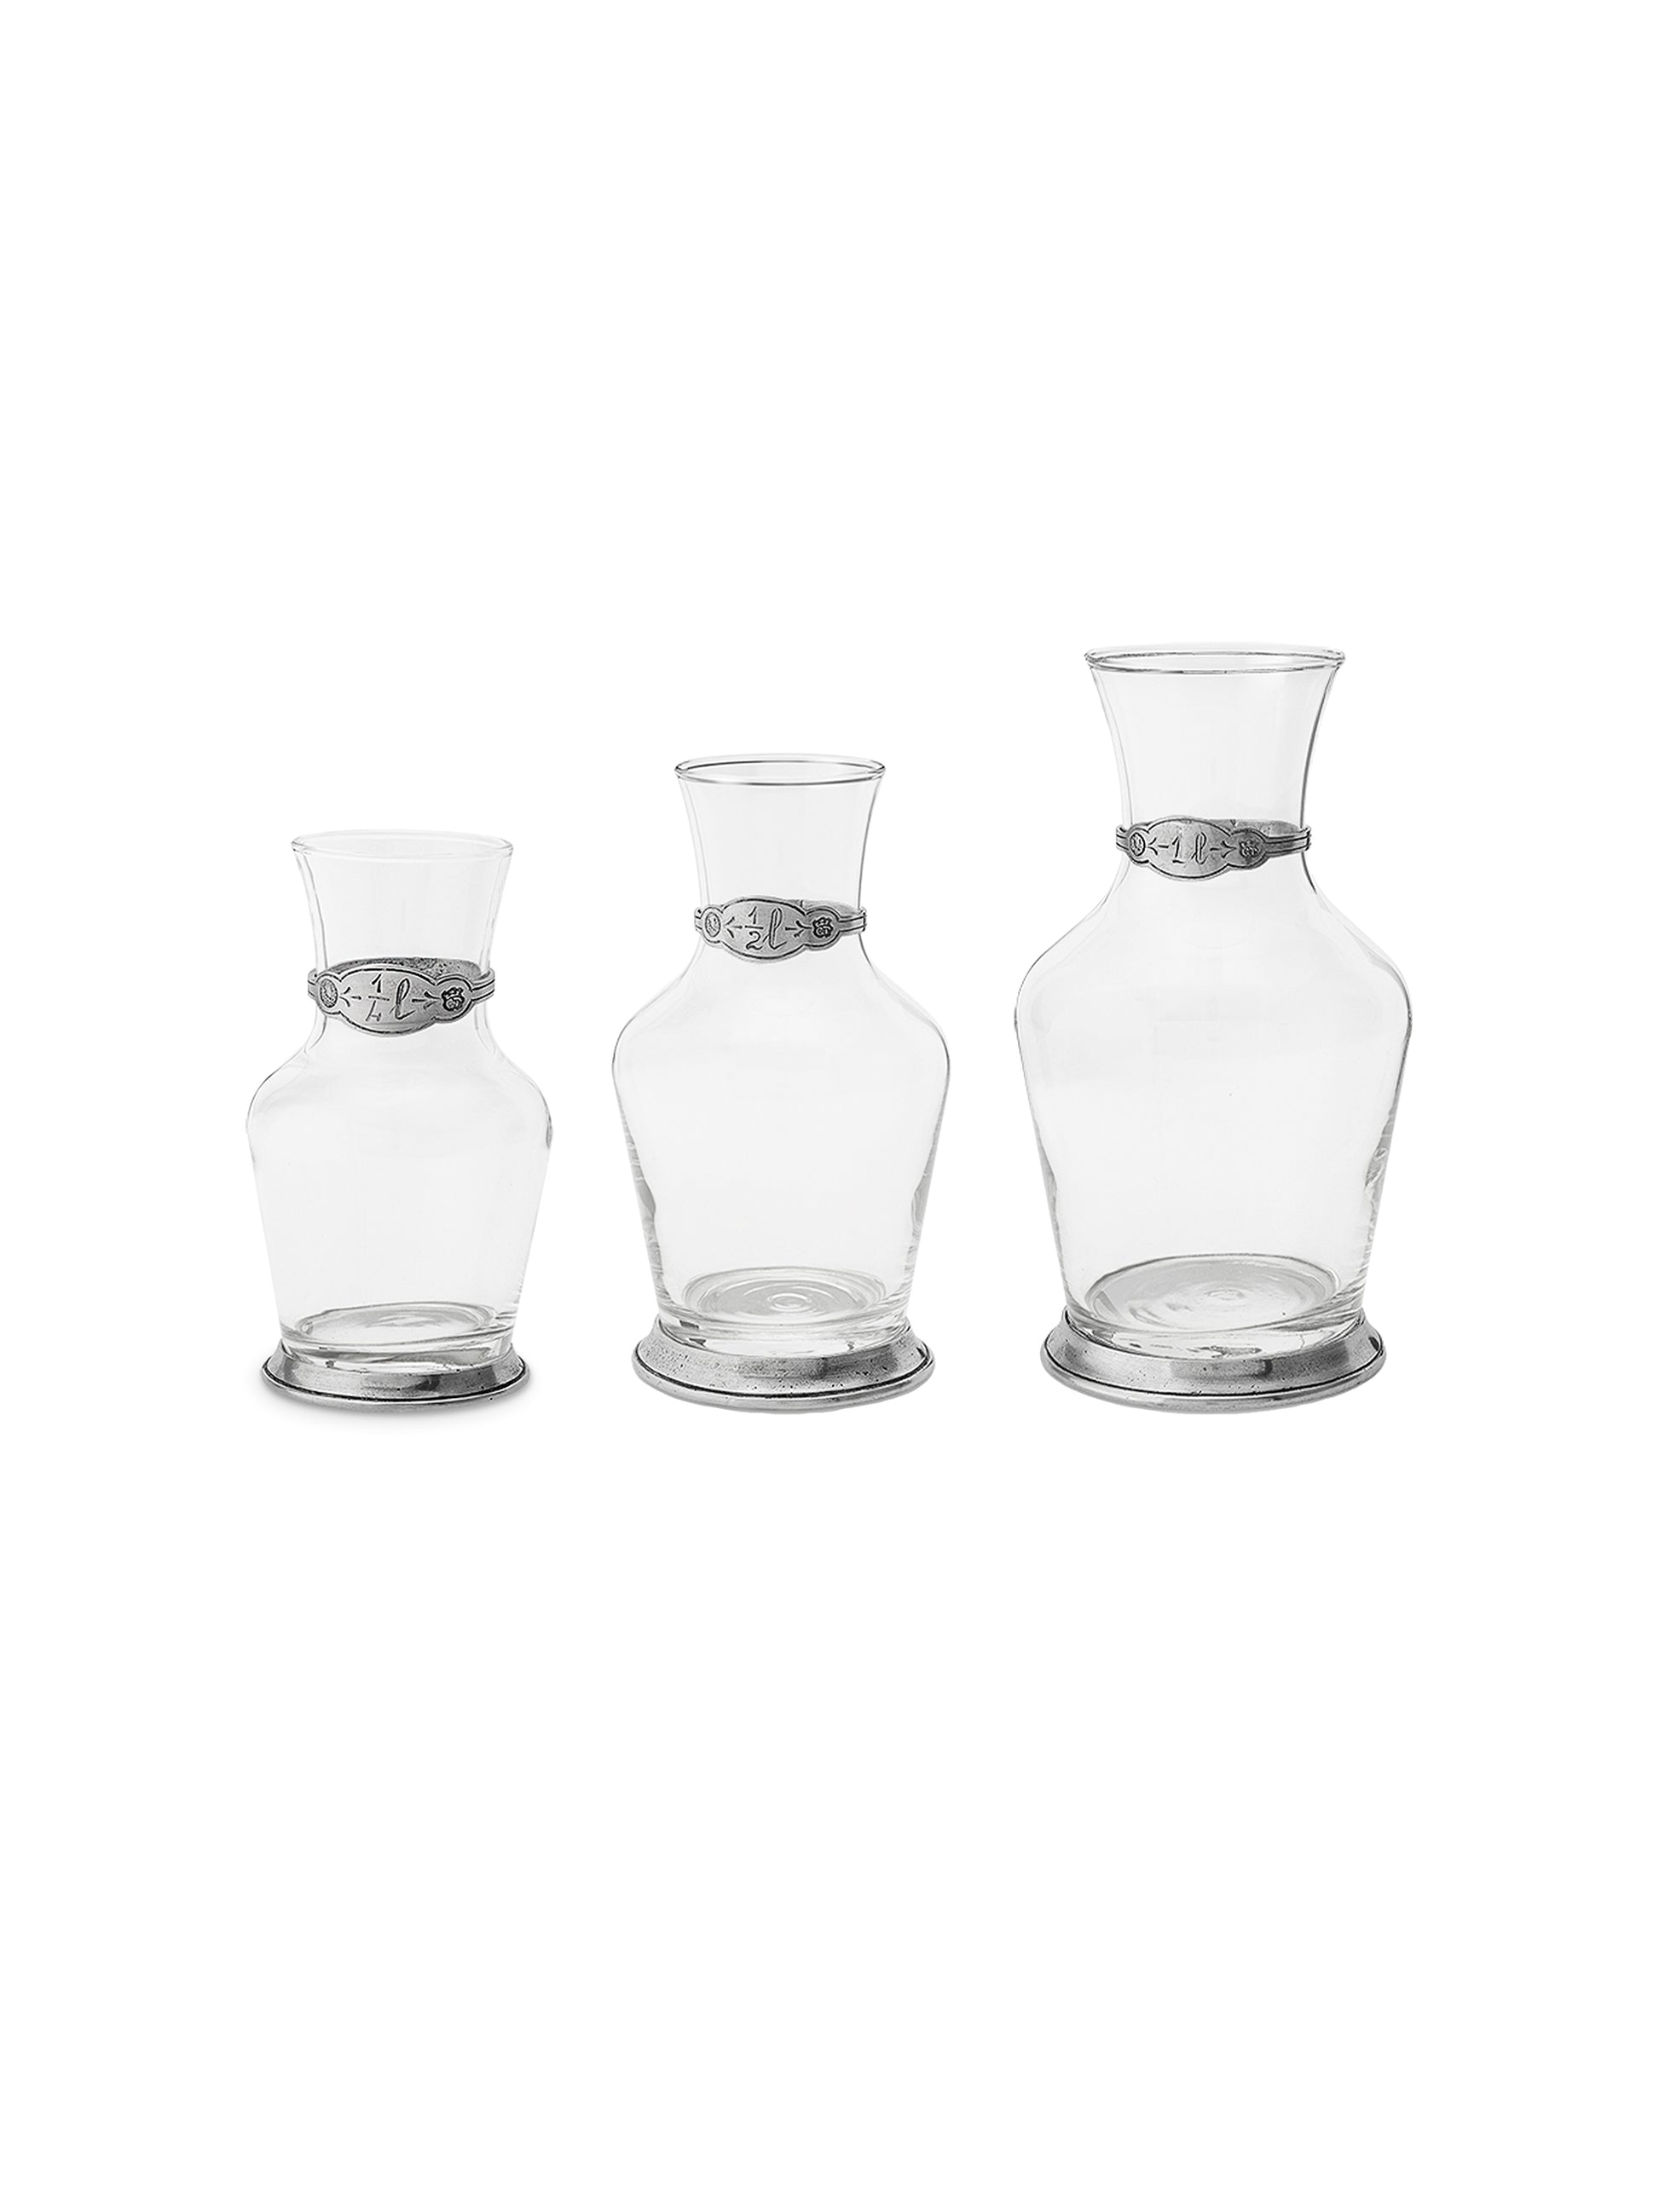 MATCH Pewter Glass Carafe Weston Table